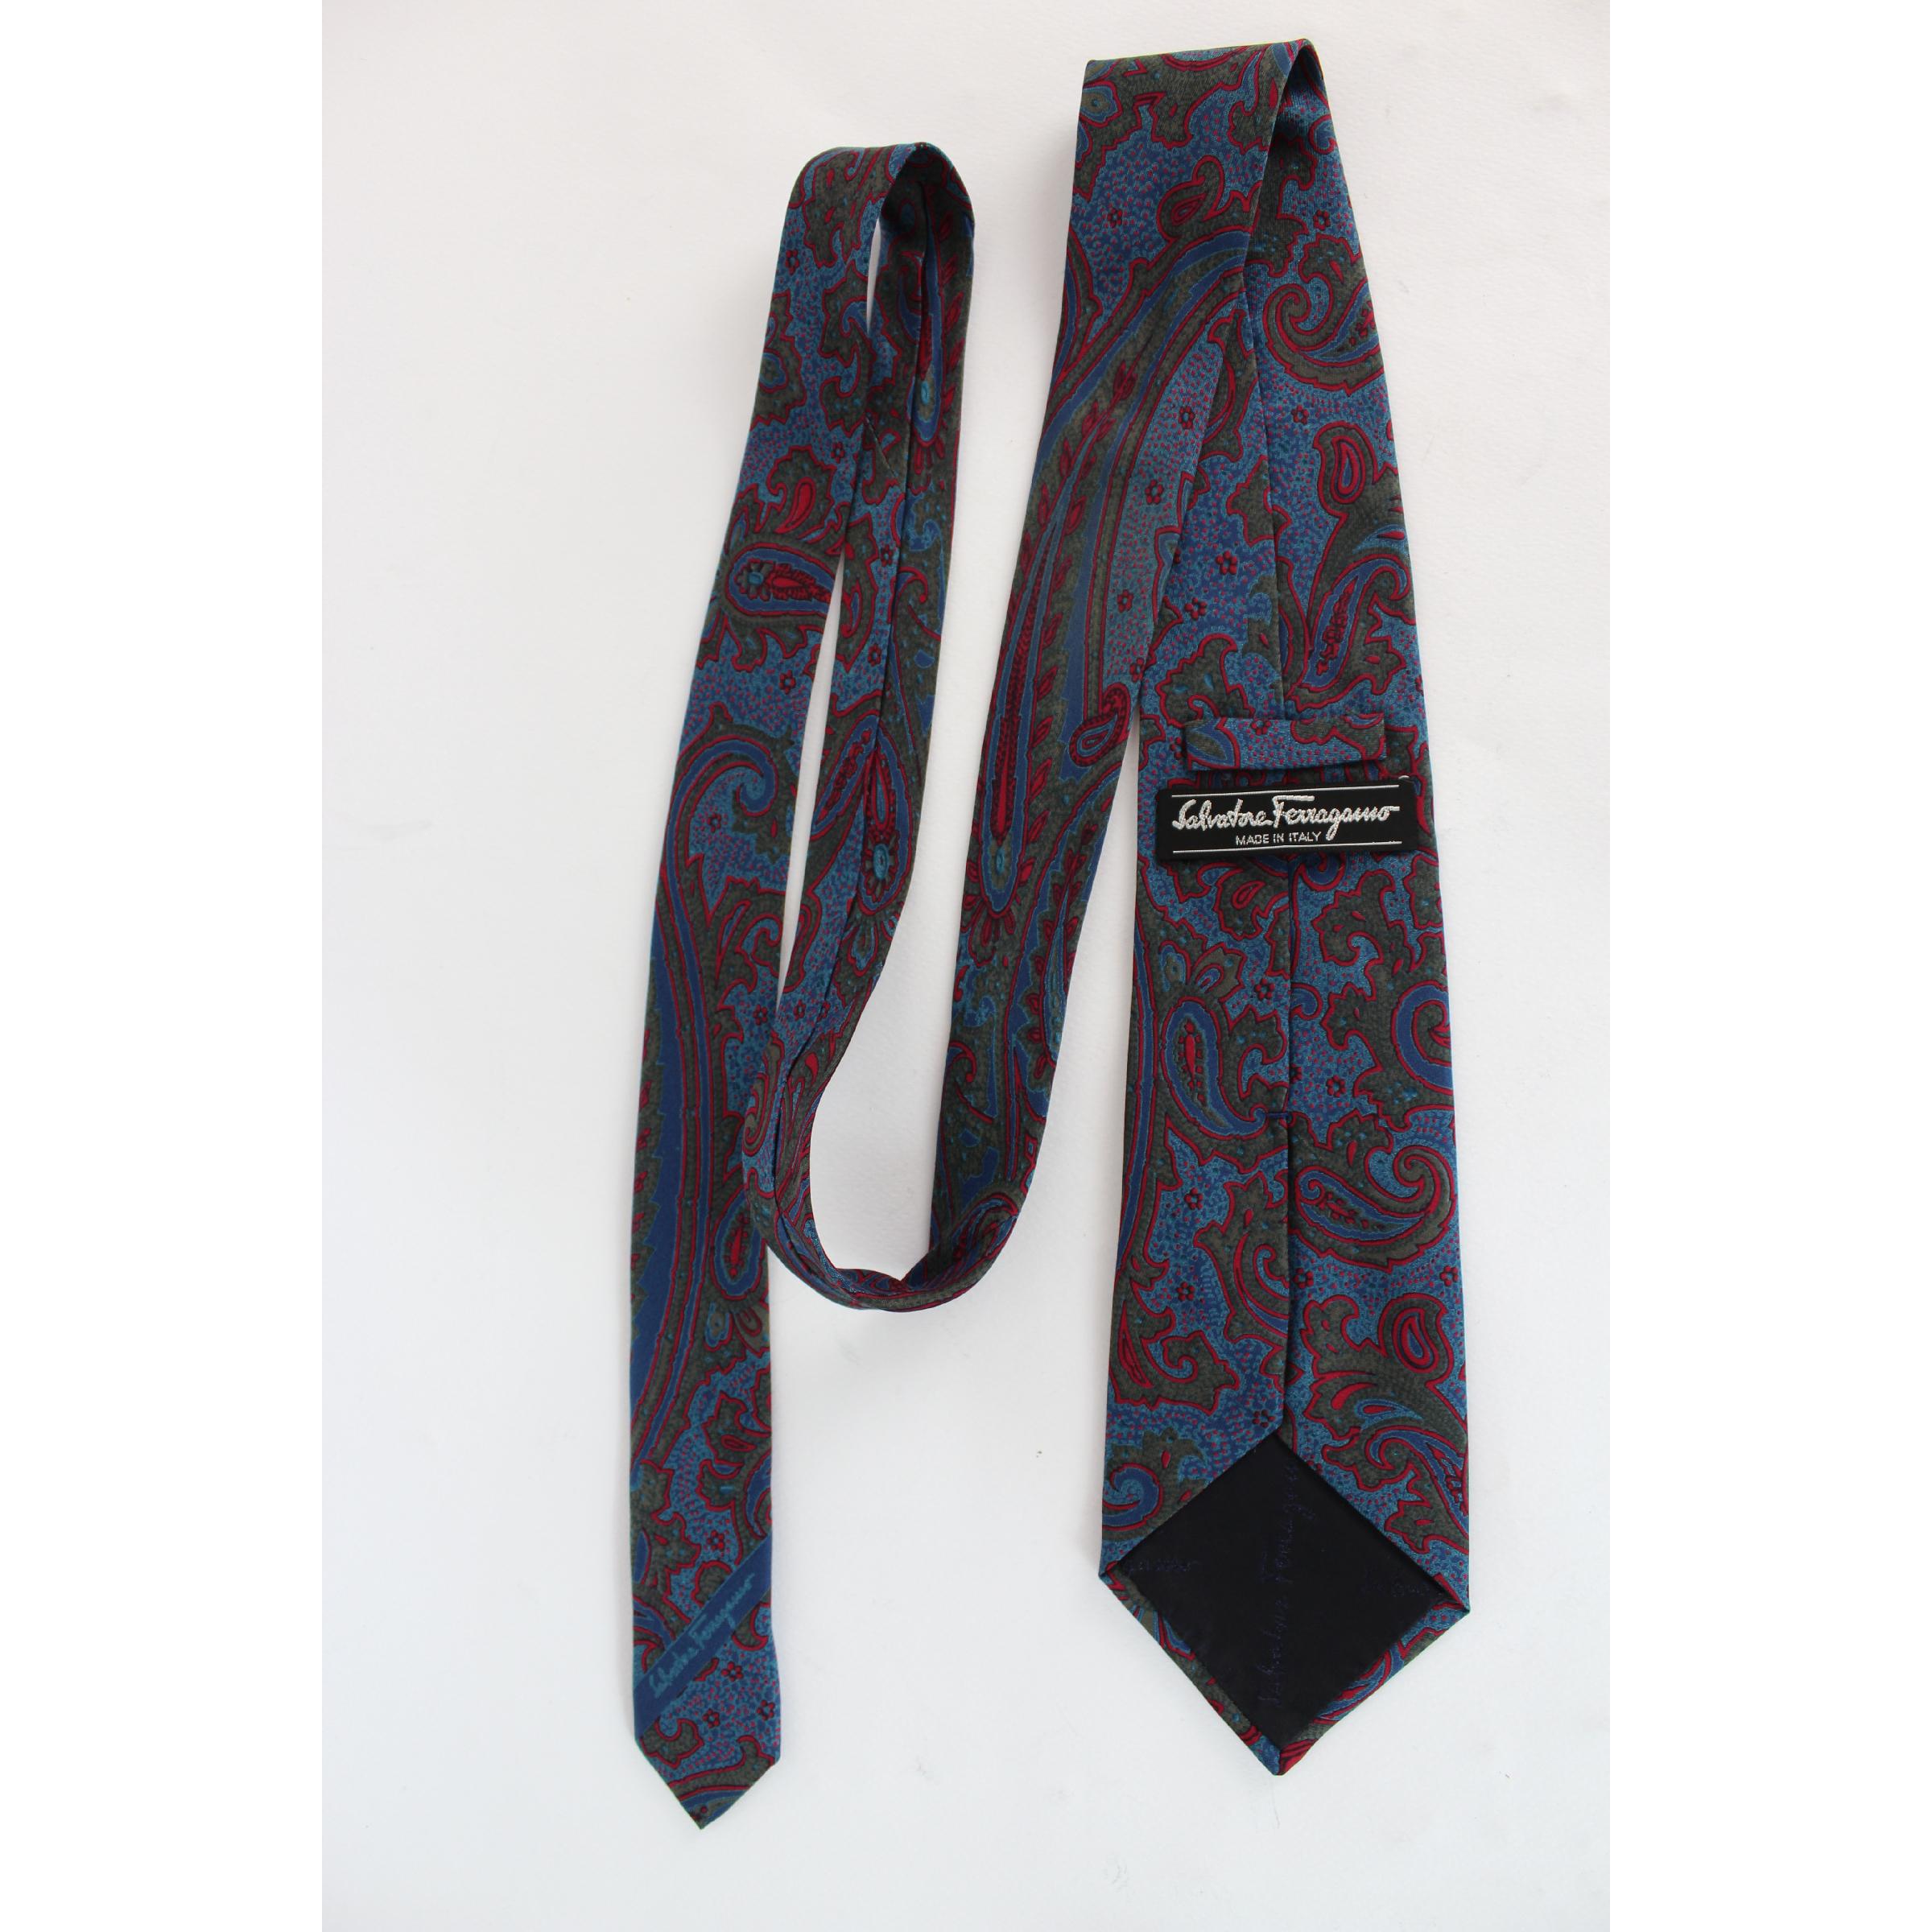 Salvatore Ferragamo vintage 80's tie. Red and blue color, paisley pattern, 100% silk. Made in Italy. Excellent vintage condition. 

Length: 148 cm 
Width: 8.5 cm